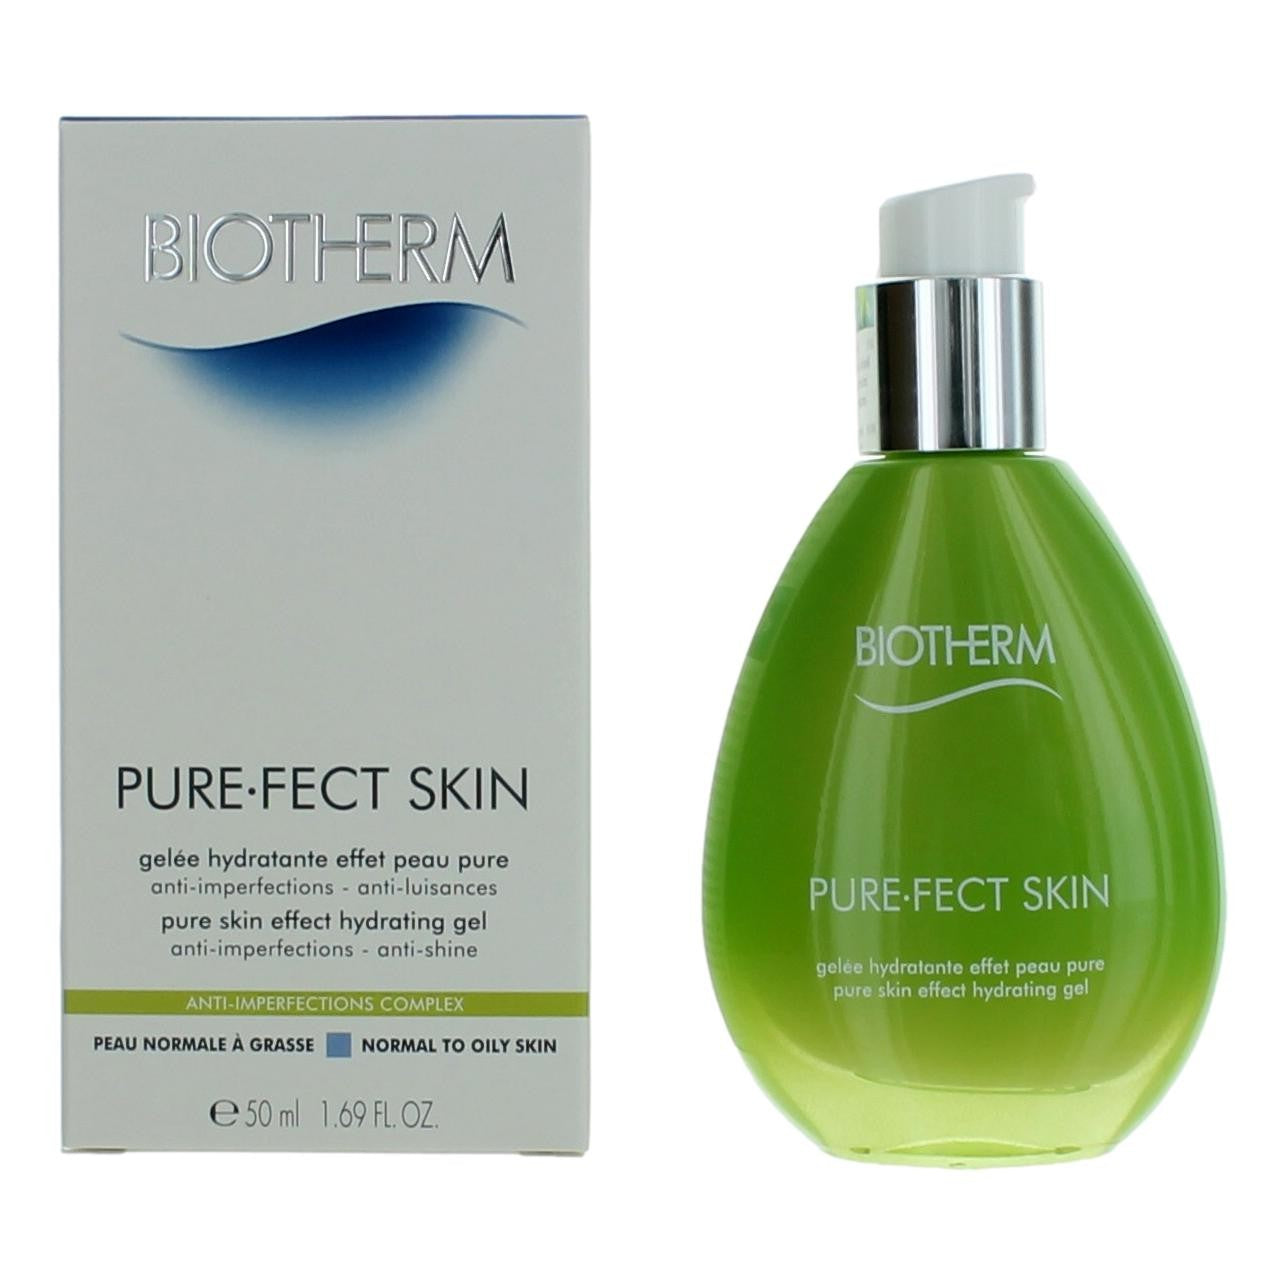 Biotherm Pure-Fect Skin by Biotherm, 1.69oz Pure Skin Effect Hydrating Gel